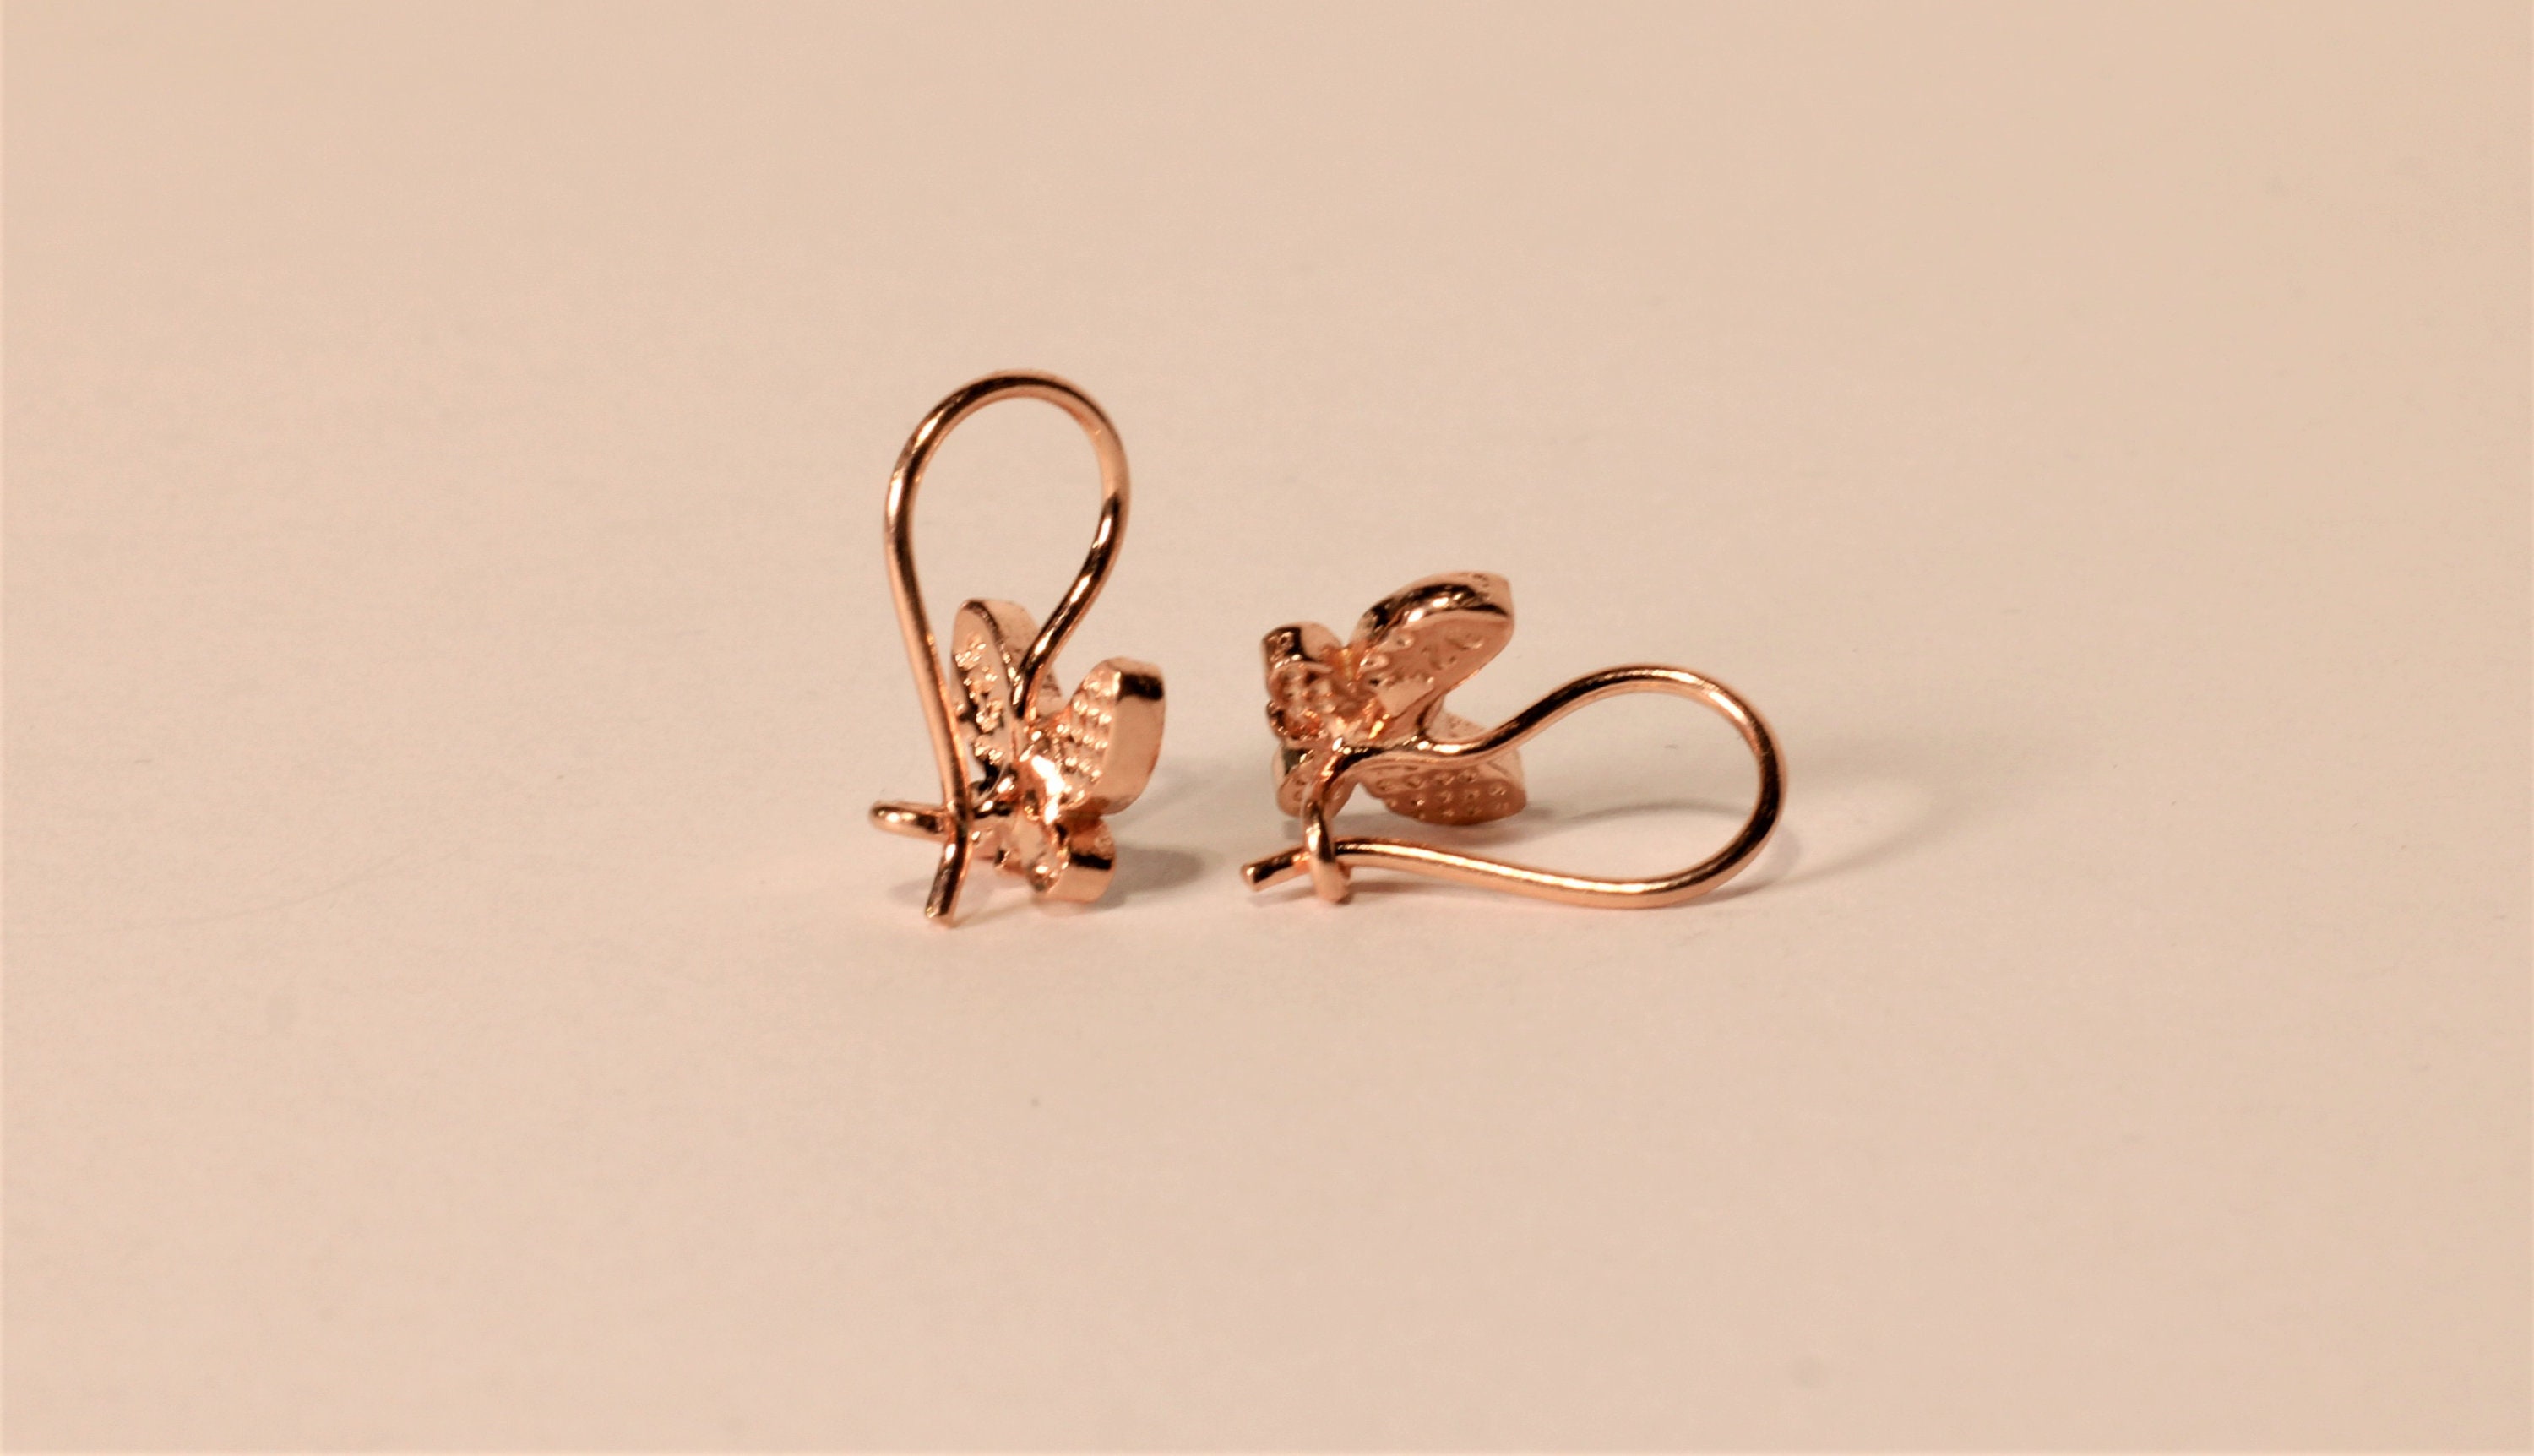 20 Pcs/ 10 Pairs Rose Gold Flashed Silver Butterfly Earring Backs Replacement for Stud Earrings Accessories DIY Tools, 5x4x3mm